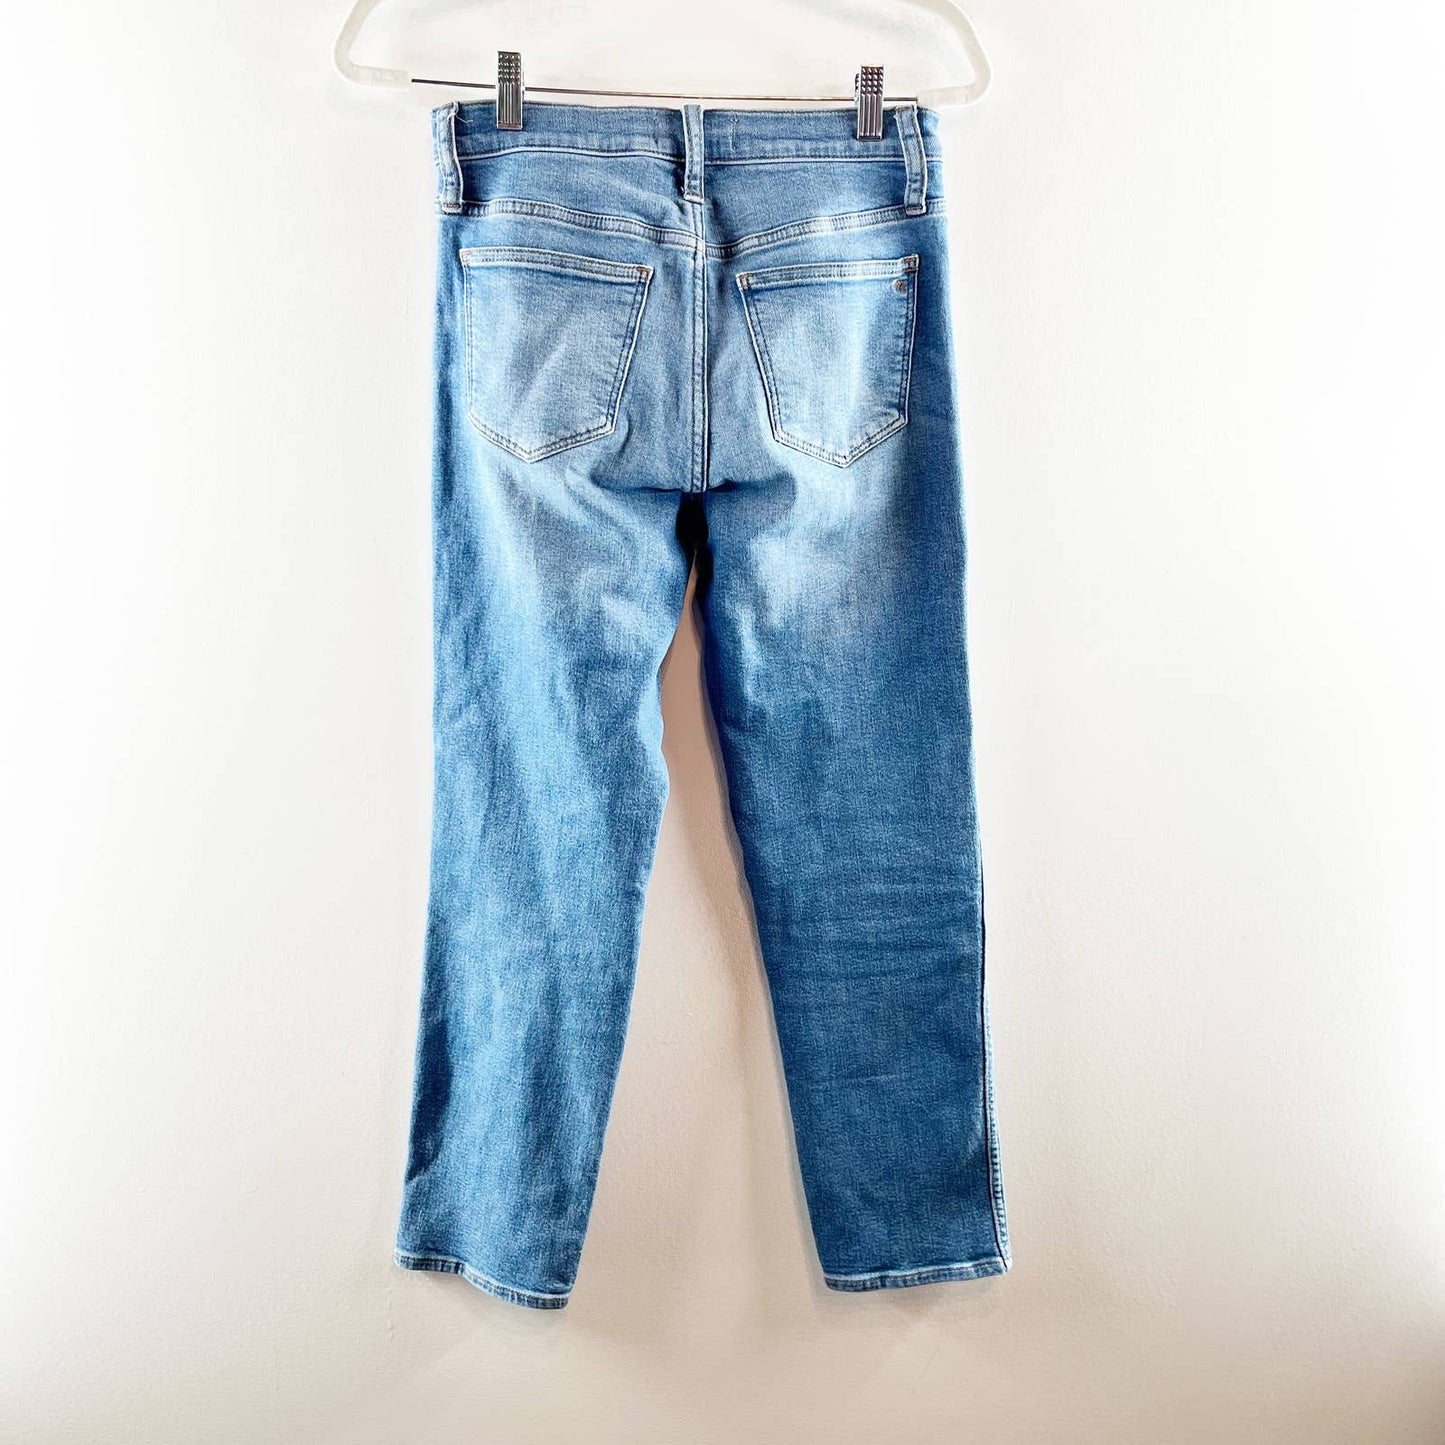 Madewell Stovepipe Pull On High Waisted Denim Straight Jeans Medium Blue Wash 26